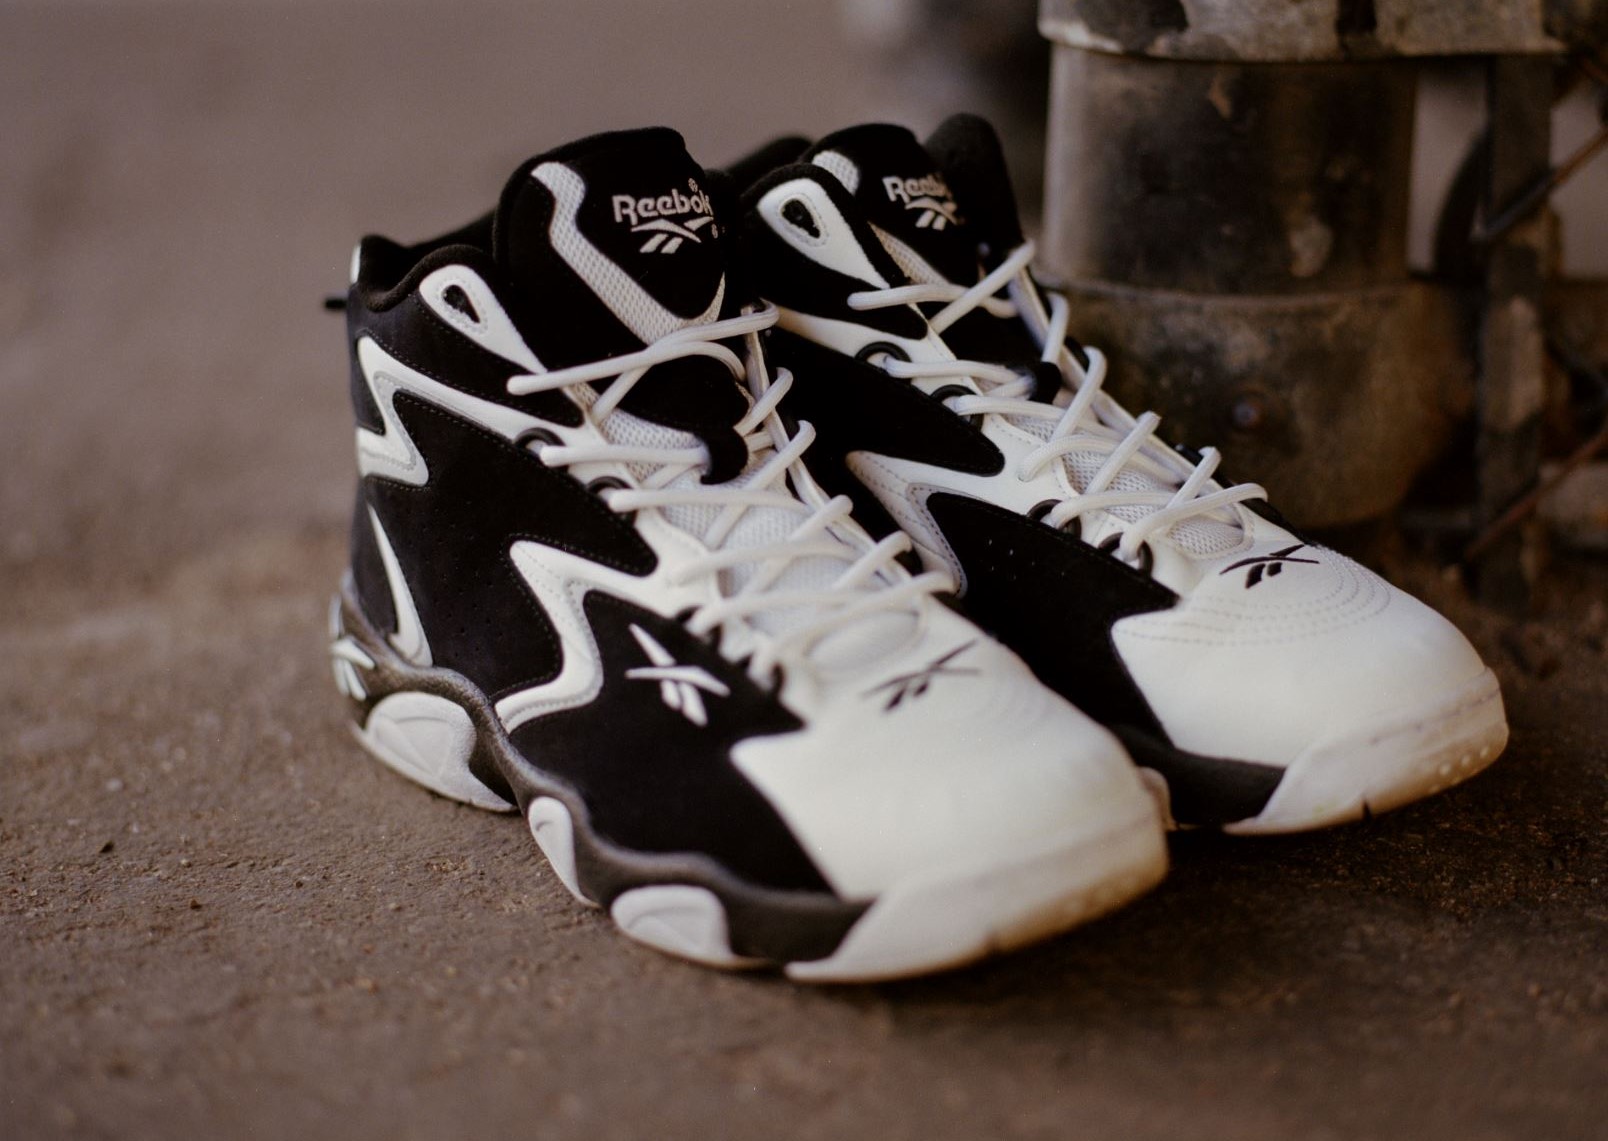 The Reebok Mobius OG is a New Heritage 